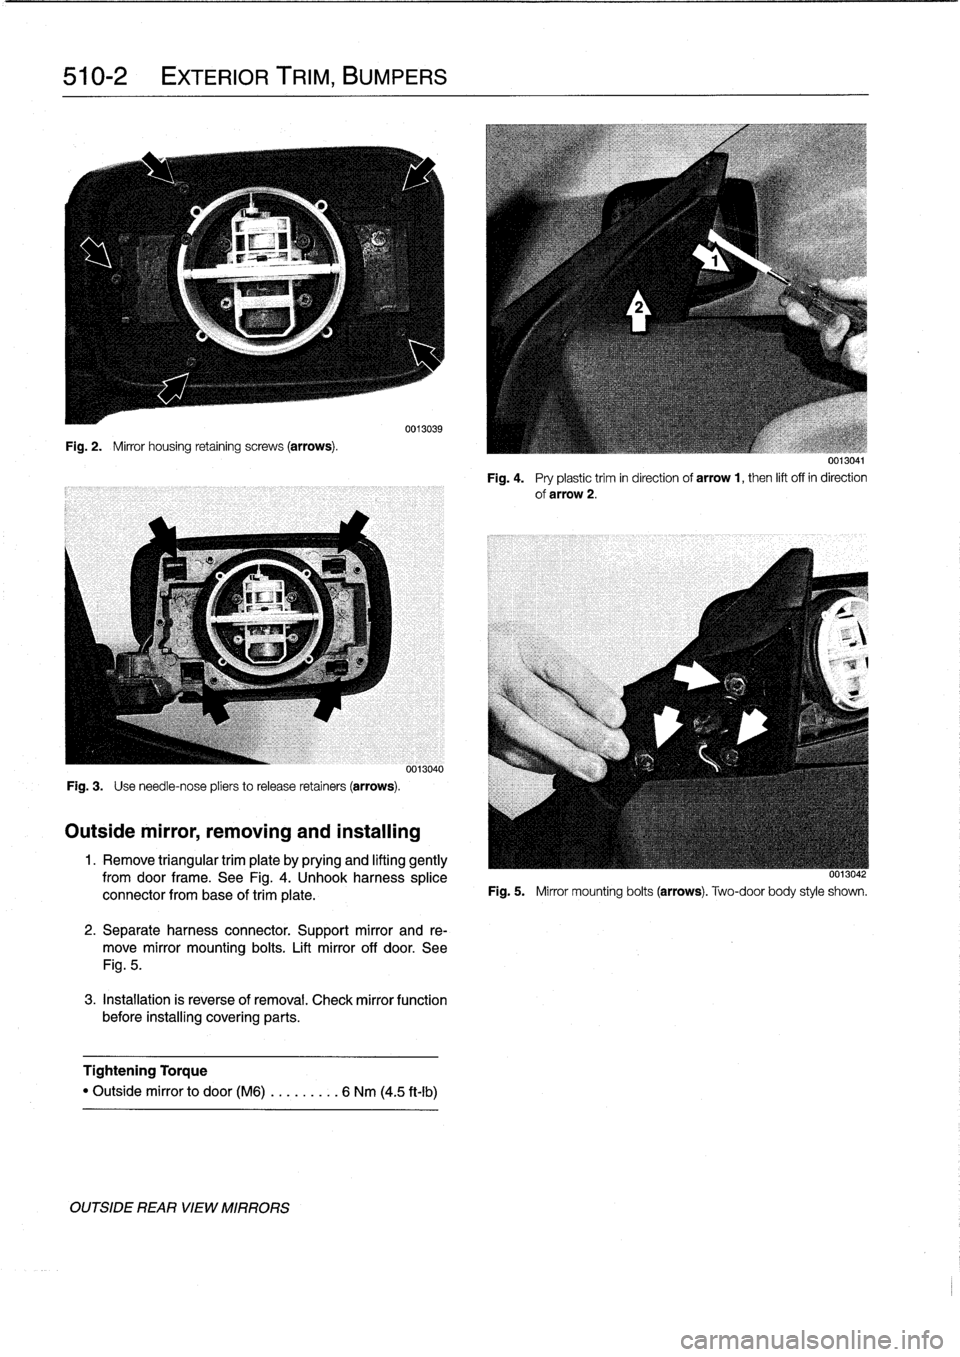 BMW 318i 1998 E36 Workshop Manual 
510-2

	

EXTERIOR
TRIIVI,
BUMPERS

Fig
.
2
.

	

Mirror
housing
retaining
screws
(arrows)
.

Fig
.
3
.

	

Use
need1e-nose
pliers
to
release
retainers
(arrows)
.

Outside
mirror,
removing
and
instal